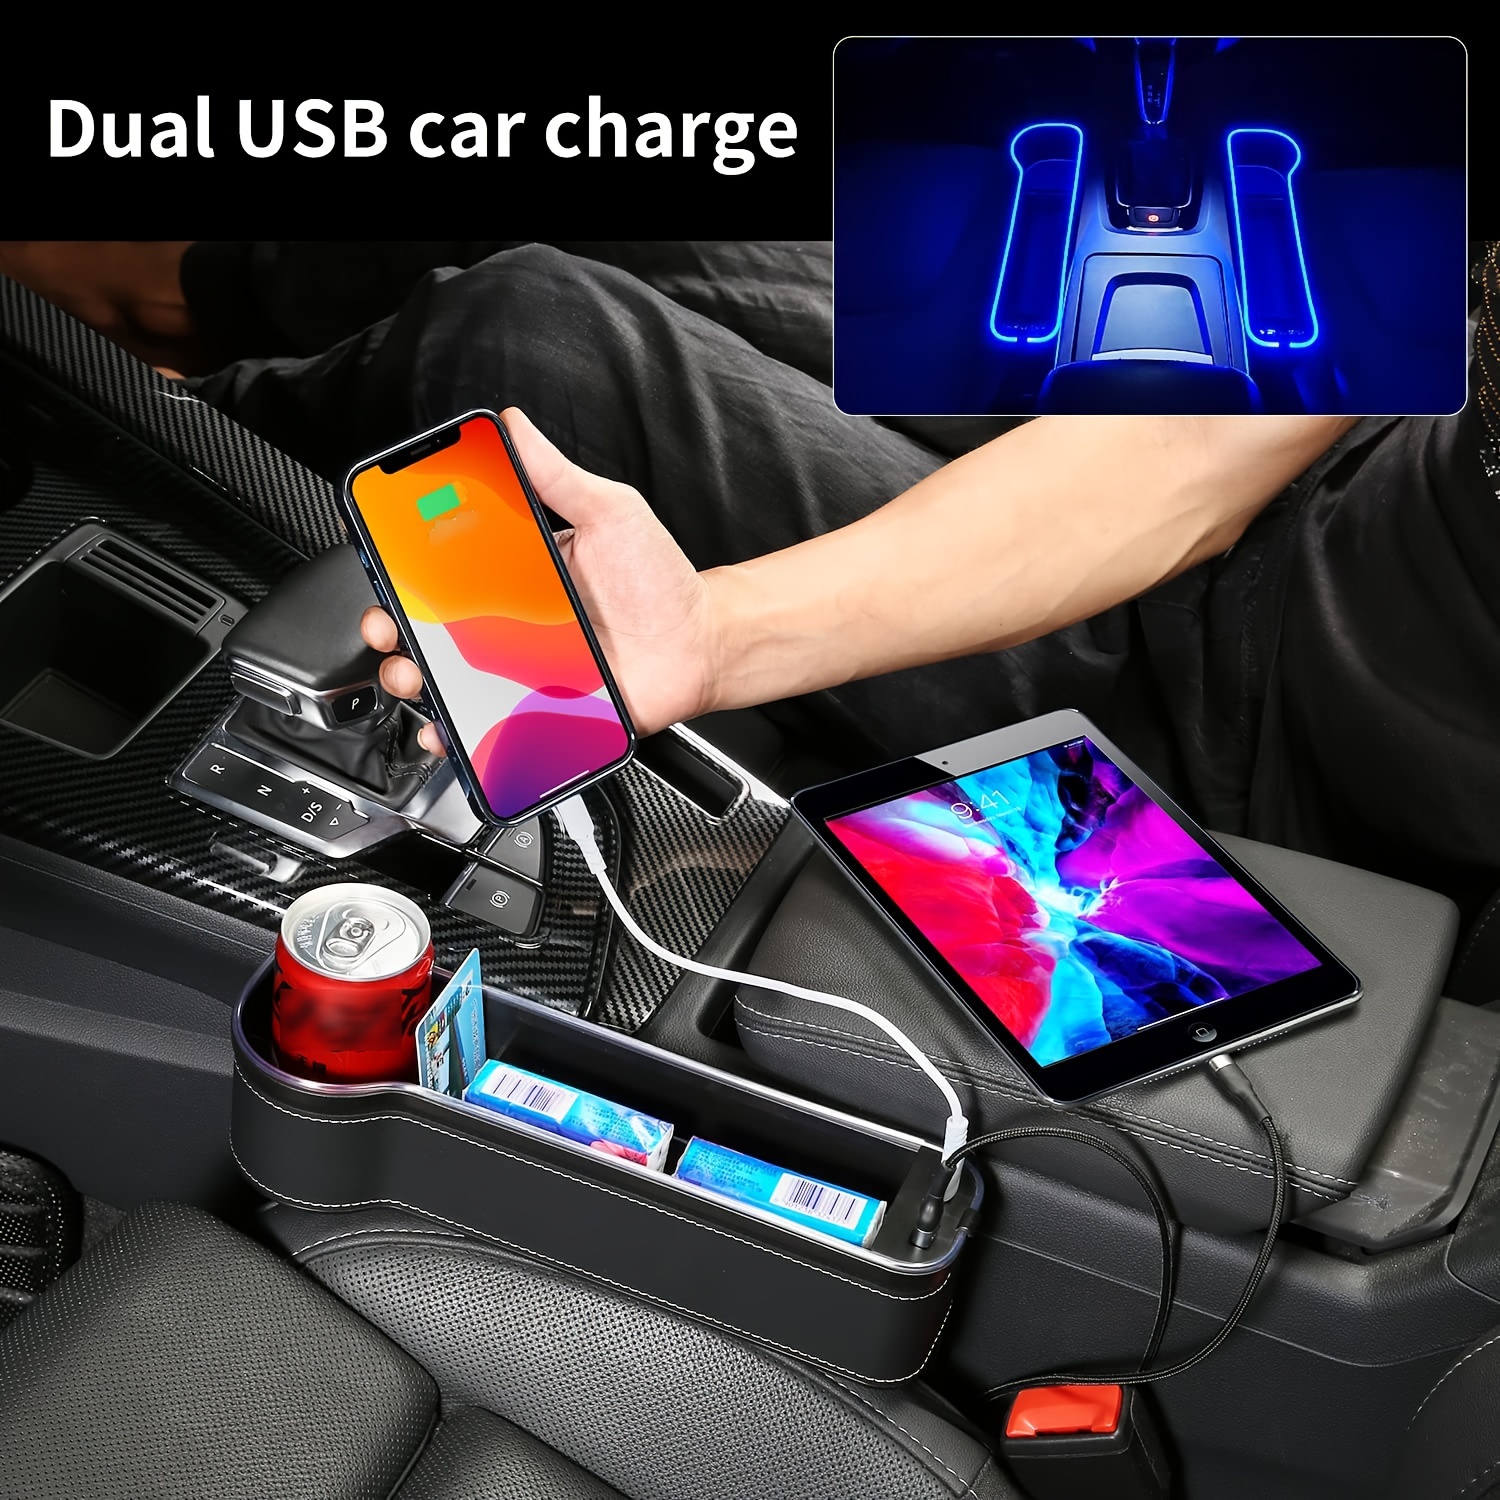 Car Seat Gap Storage Box With 2 USB Charging Port And Cup Holder -  Tanziilaat